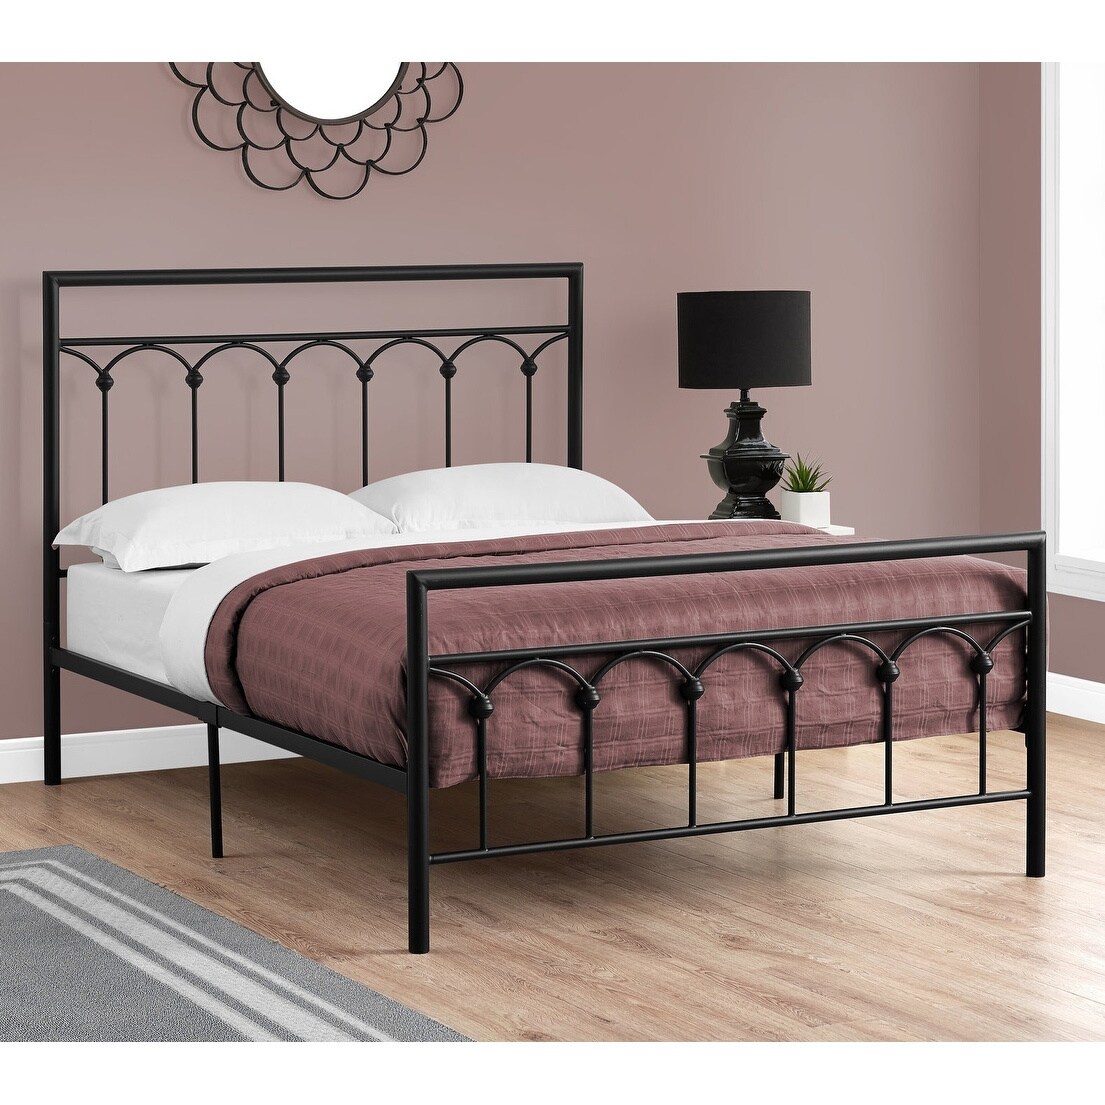 metal twin bed frame